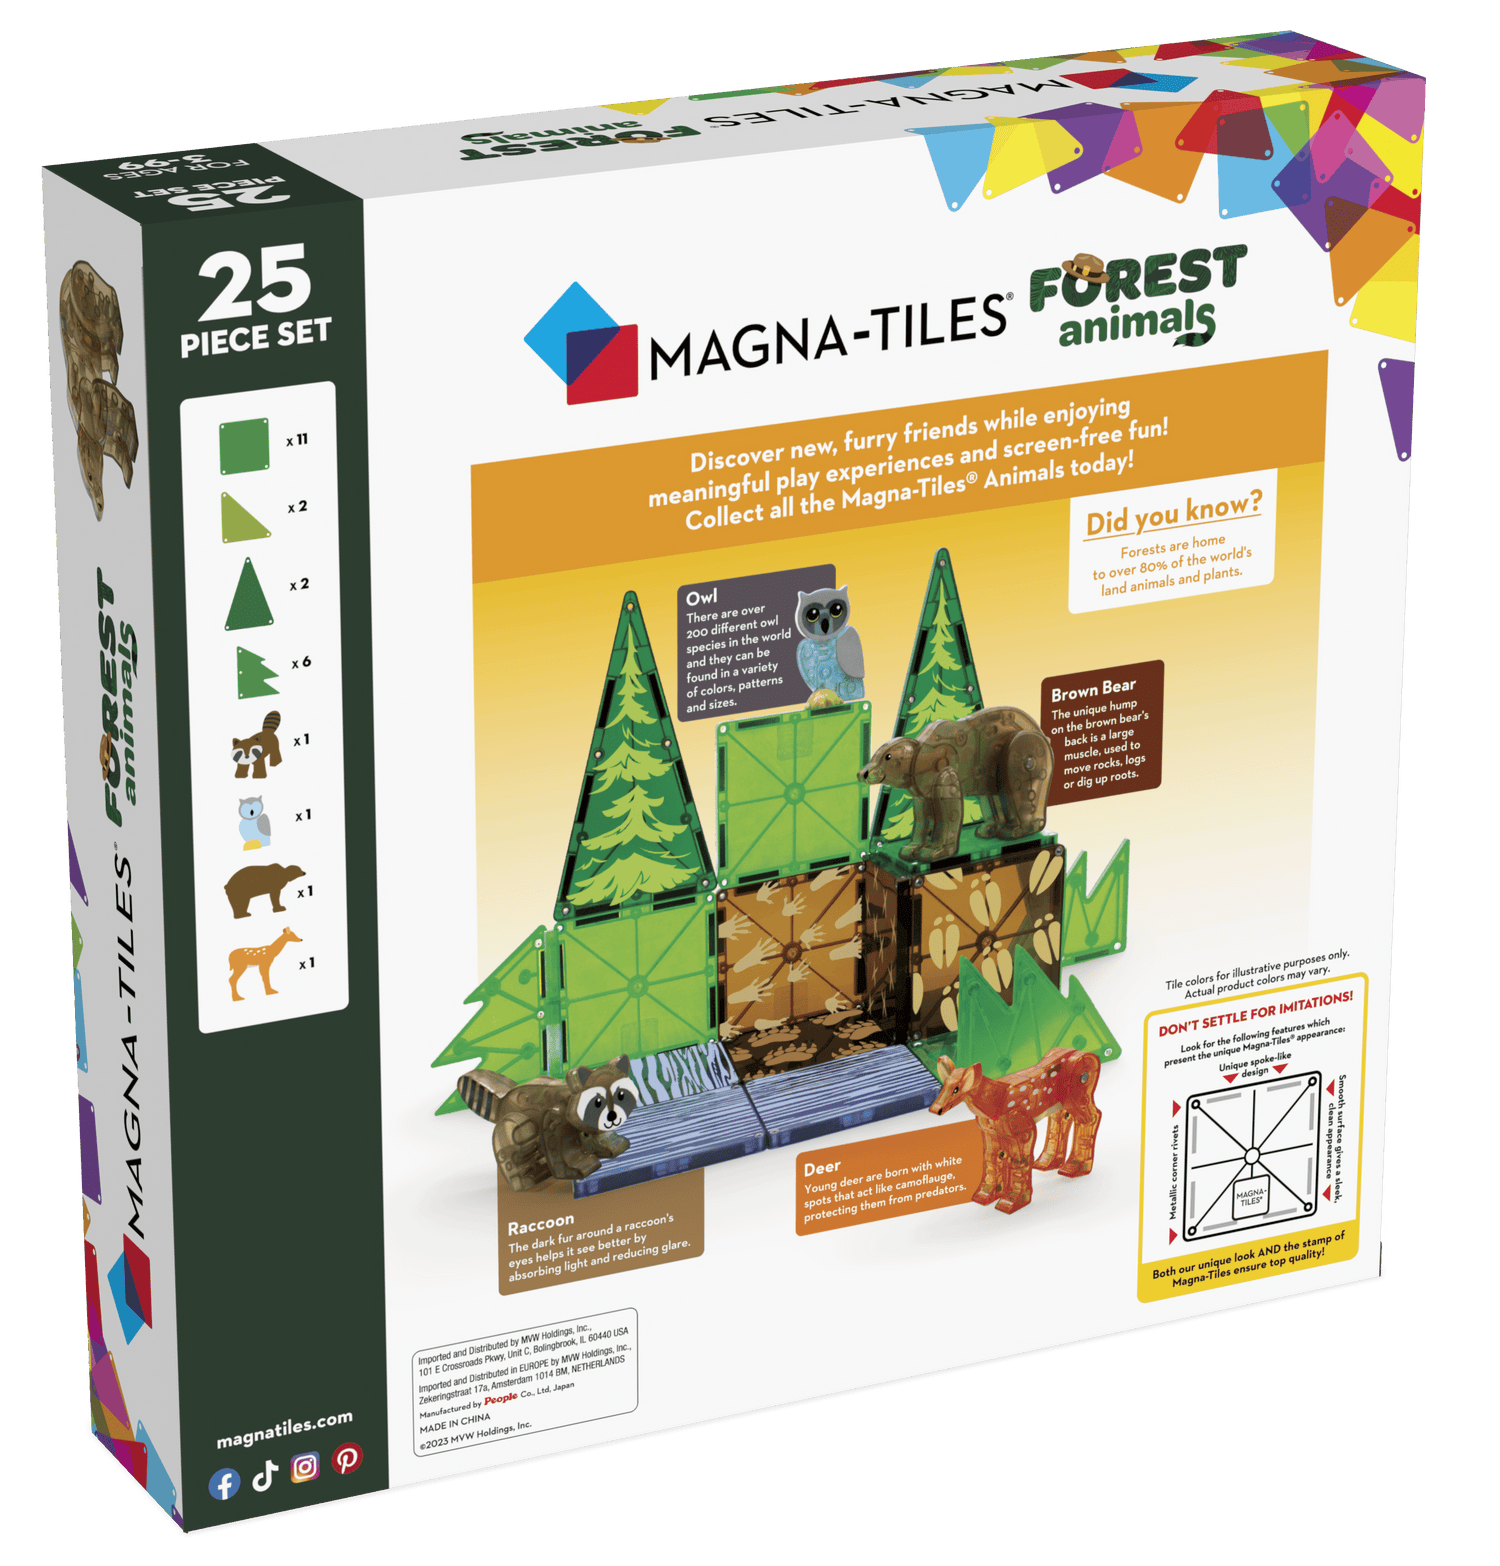 MAGNA-TILES | FOREST ANIMALS - 25 PIECE SET by MAGNA-TILES - The Playful Collective